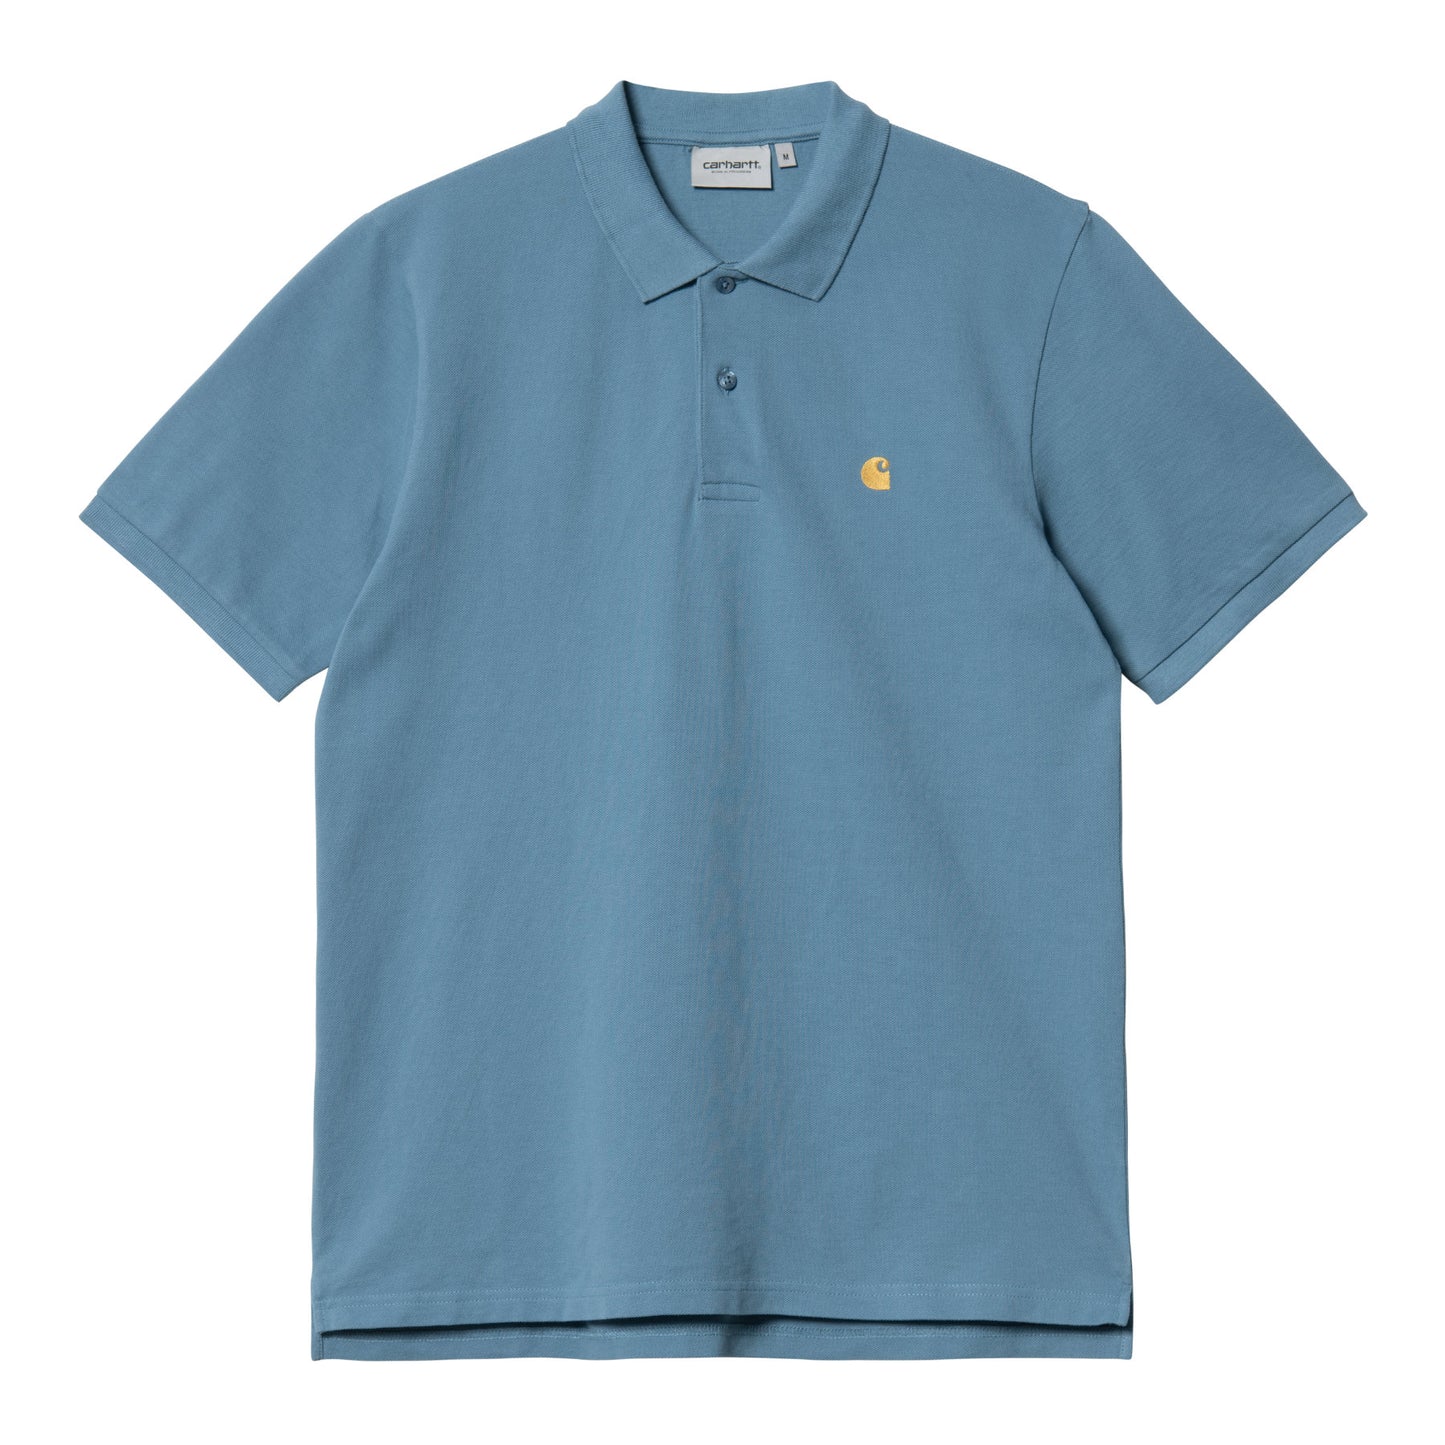 Carhartt WIP Chase Pique Polo Icy Water/Gold. Foto de frente.